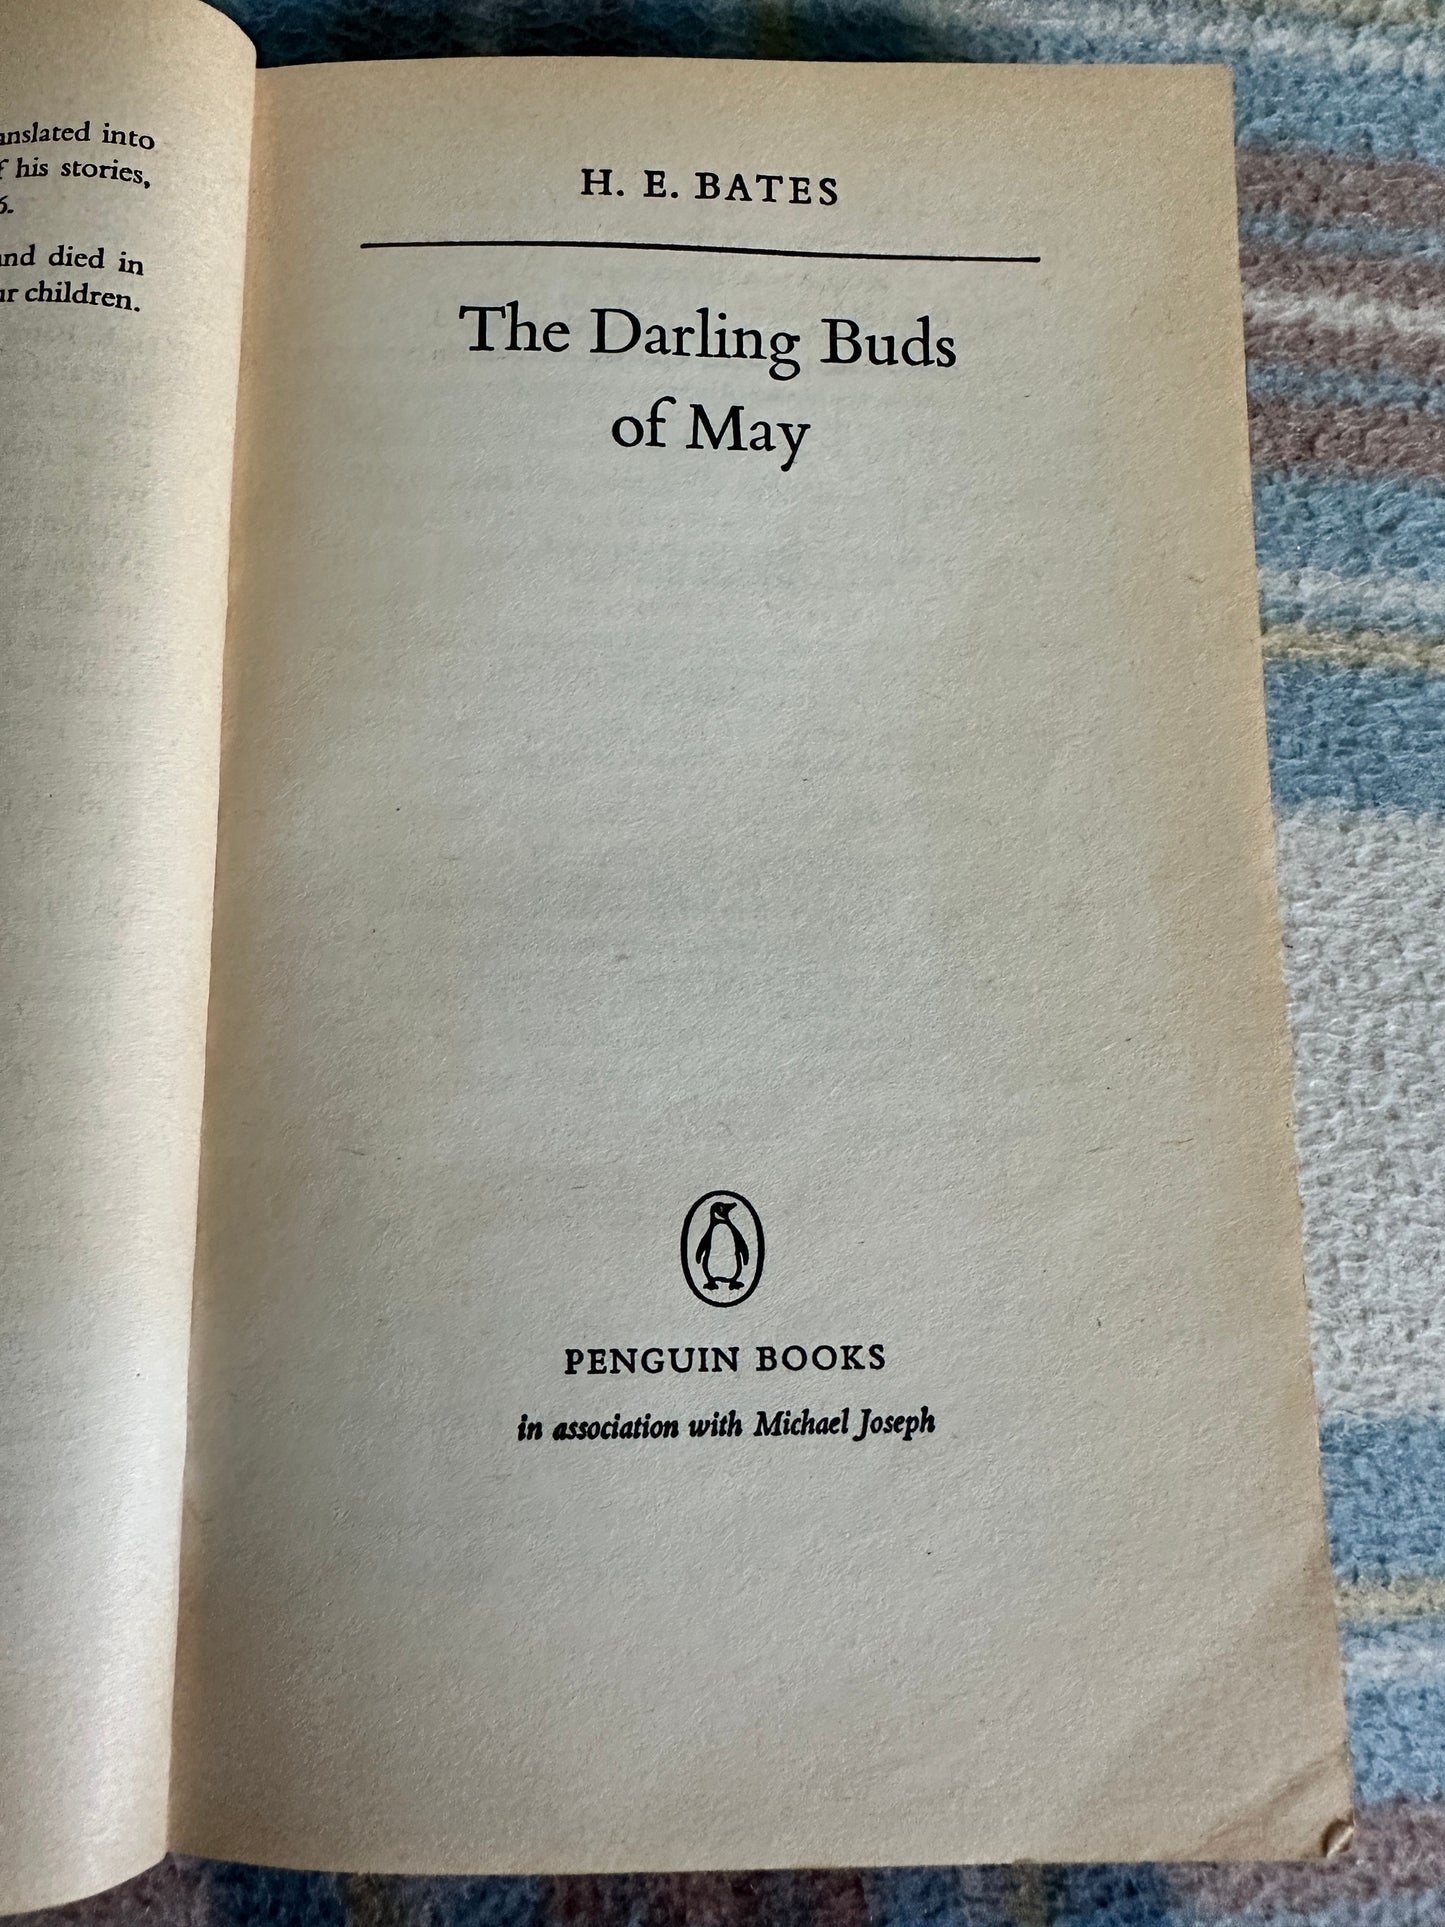 The Darling Buds Of May - H. E. Bates(Penguin)